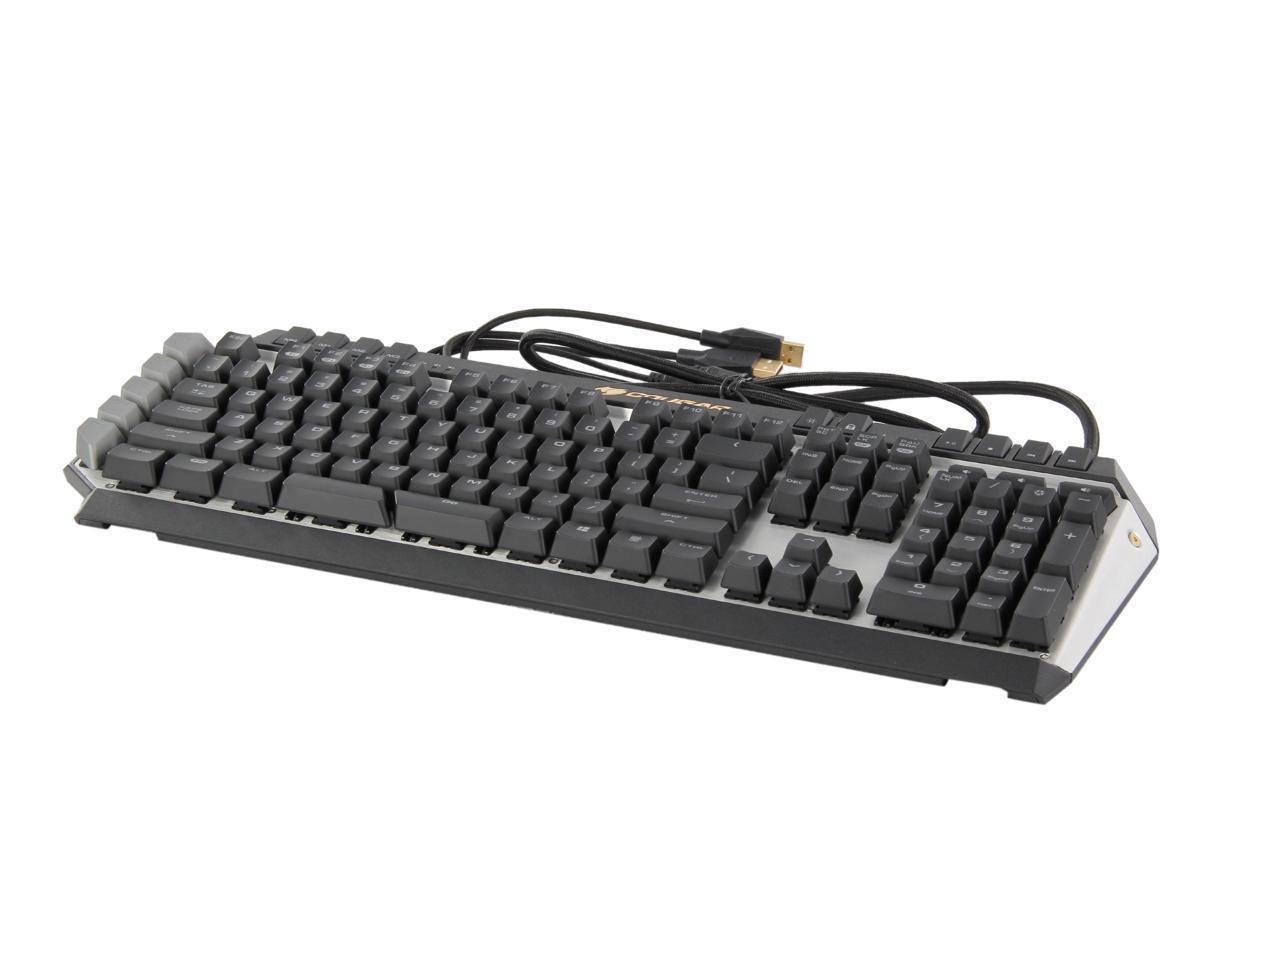 COUGAR 700K Premium Mechanical Gaming Keyboard with Aluminum Brushed  Structure, Additional 6 G-key, and Cherry Red Switches